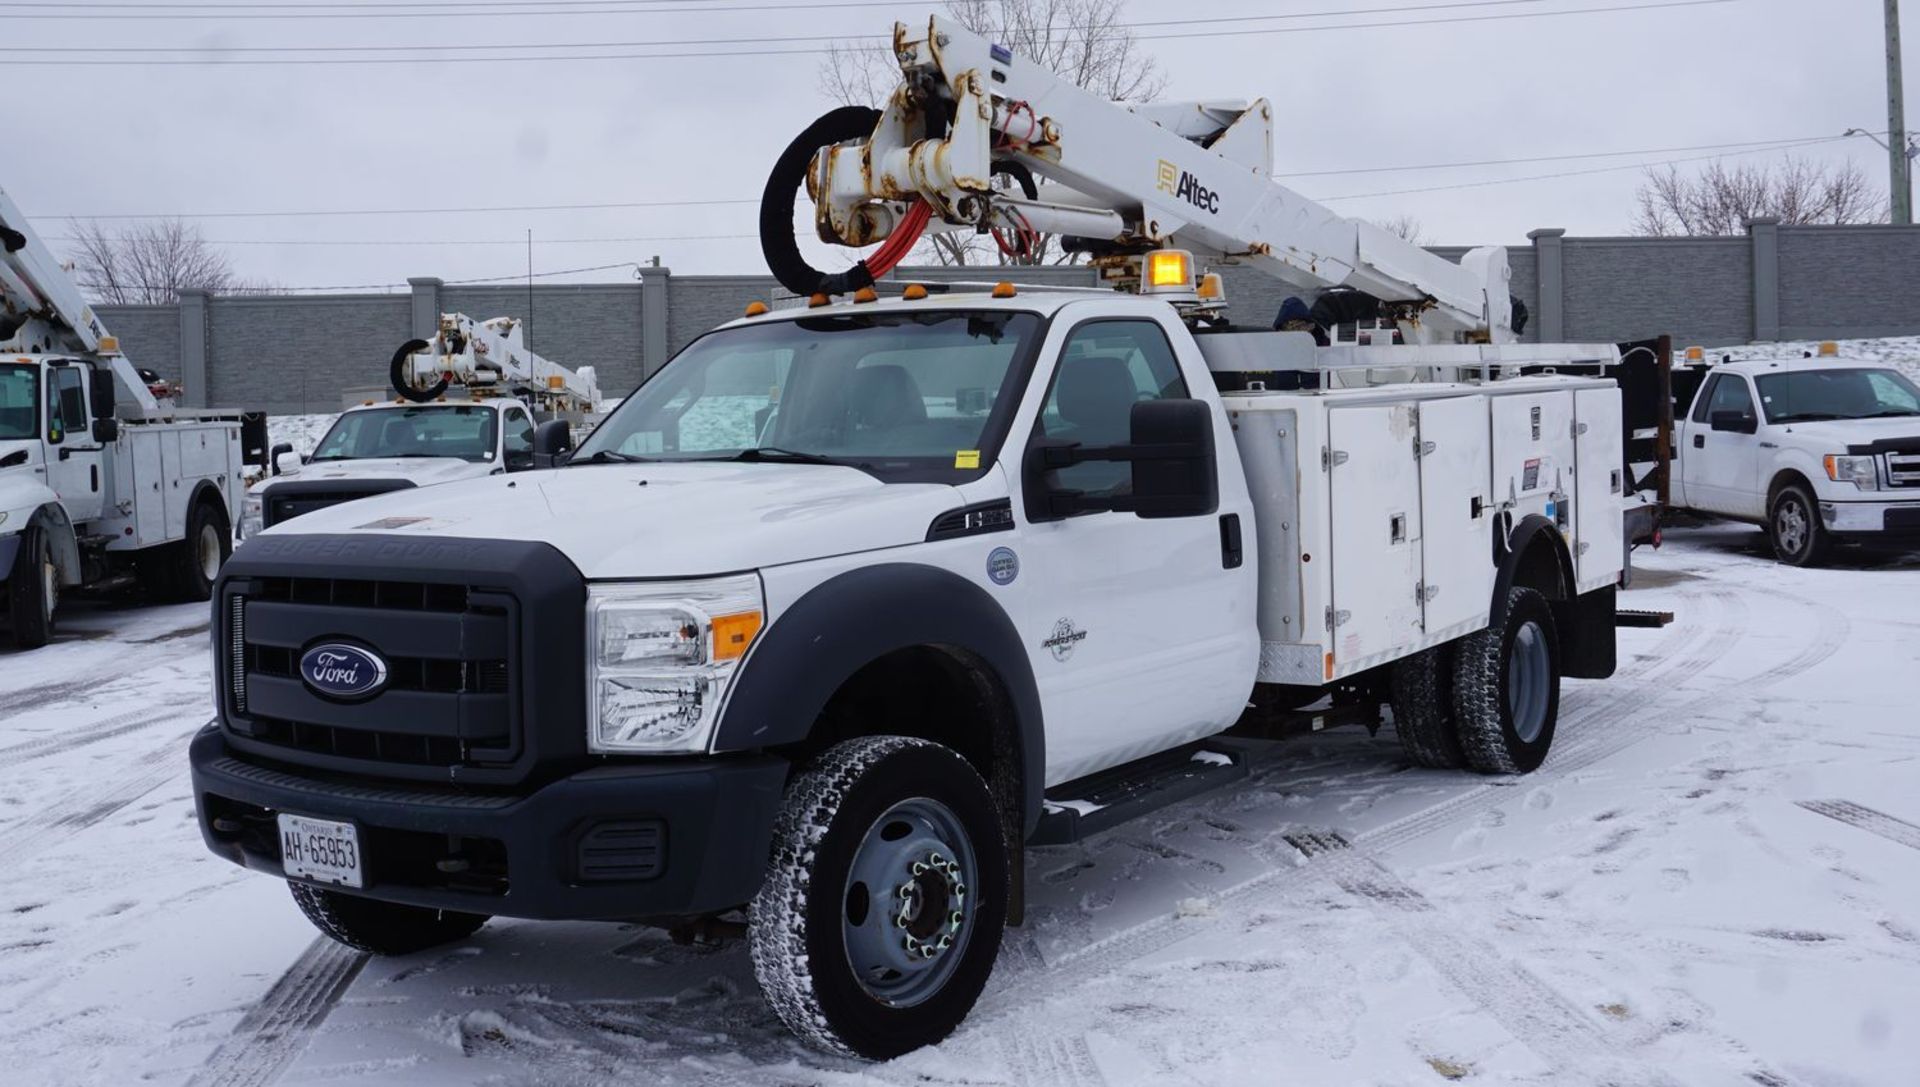 2014 ALTEC AT37G ARTICULATING TELESCOPIC BOOM & BUCKET MOUNTED ON 2014 FORD F550XL SUPER DUTY 4X4 - Image 2 of 21